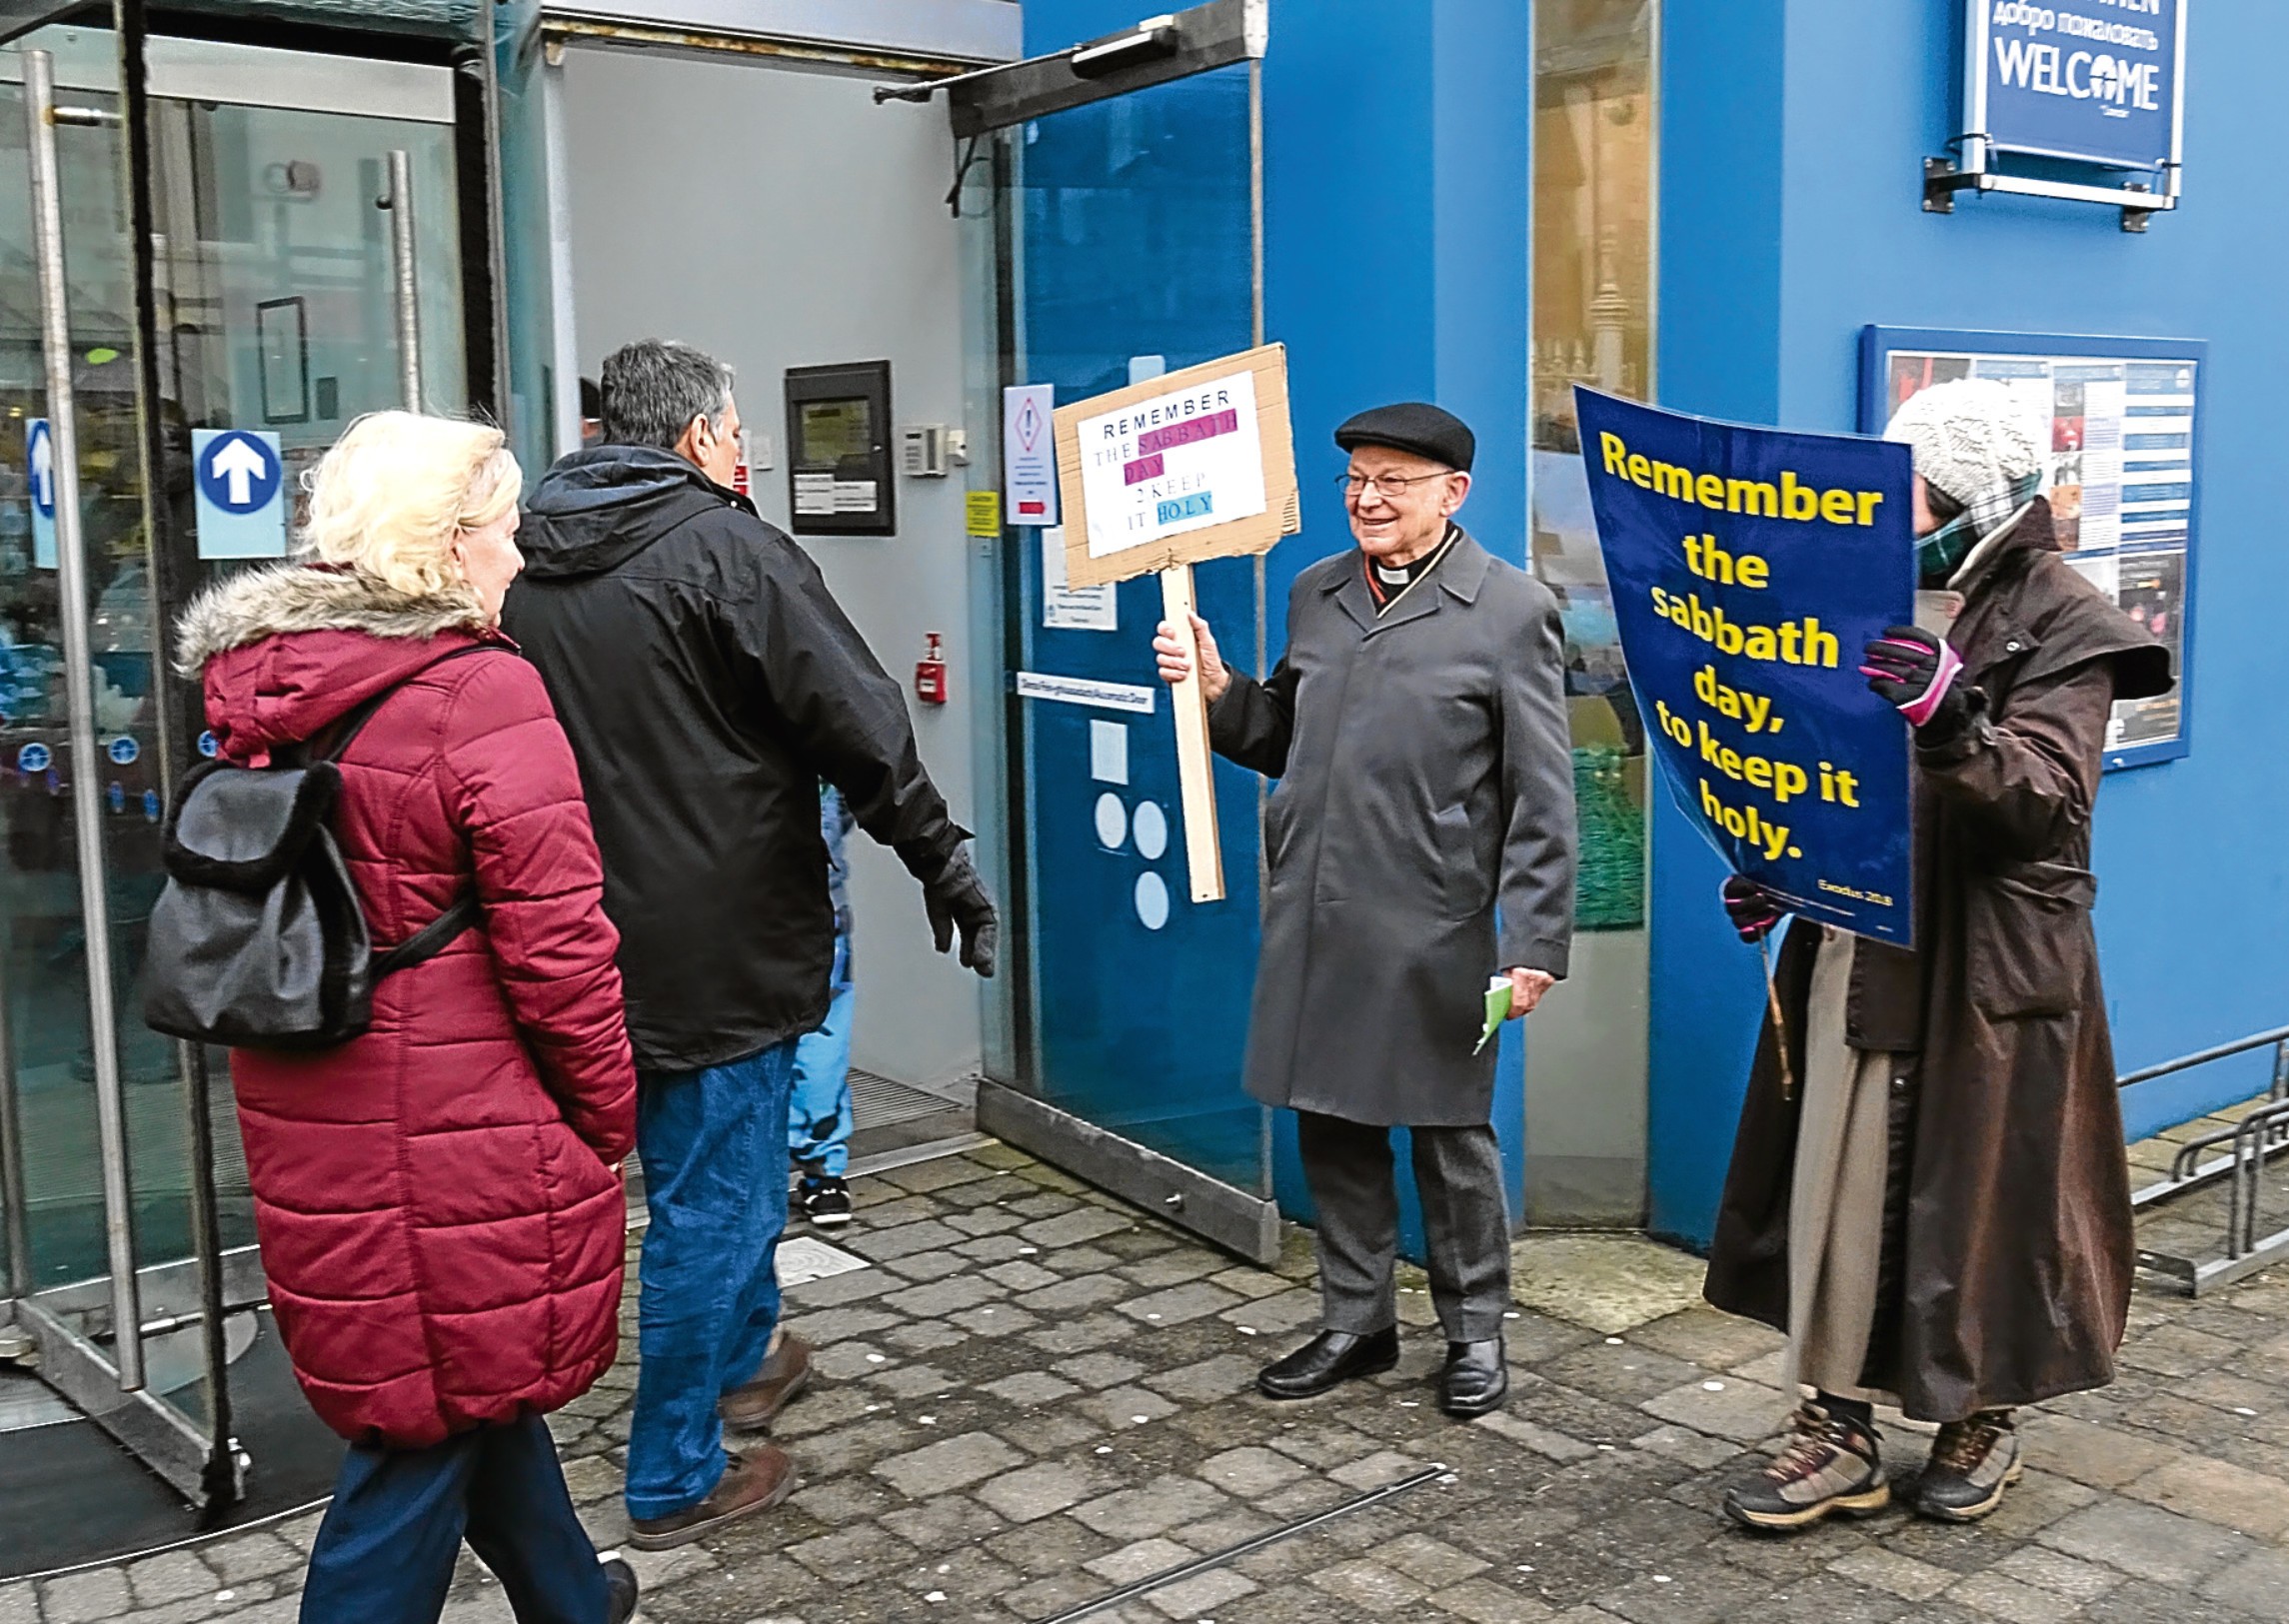 Protesters outside Stornoway Cinema as it opens for the first time on the Sabbath day.